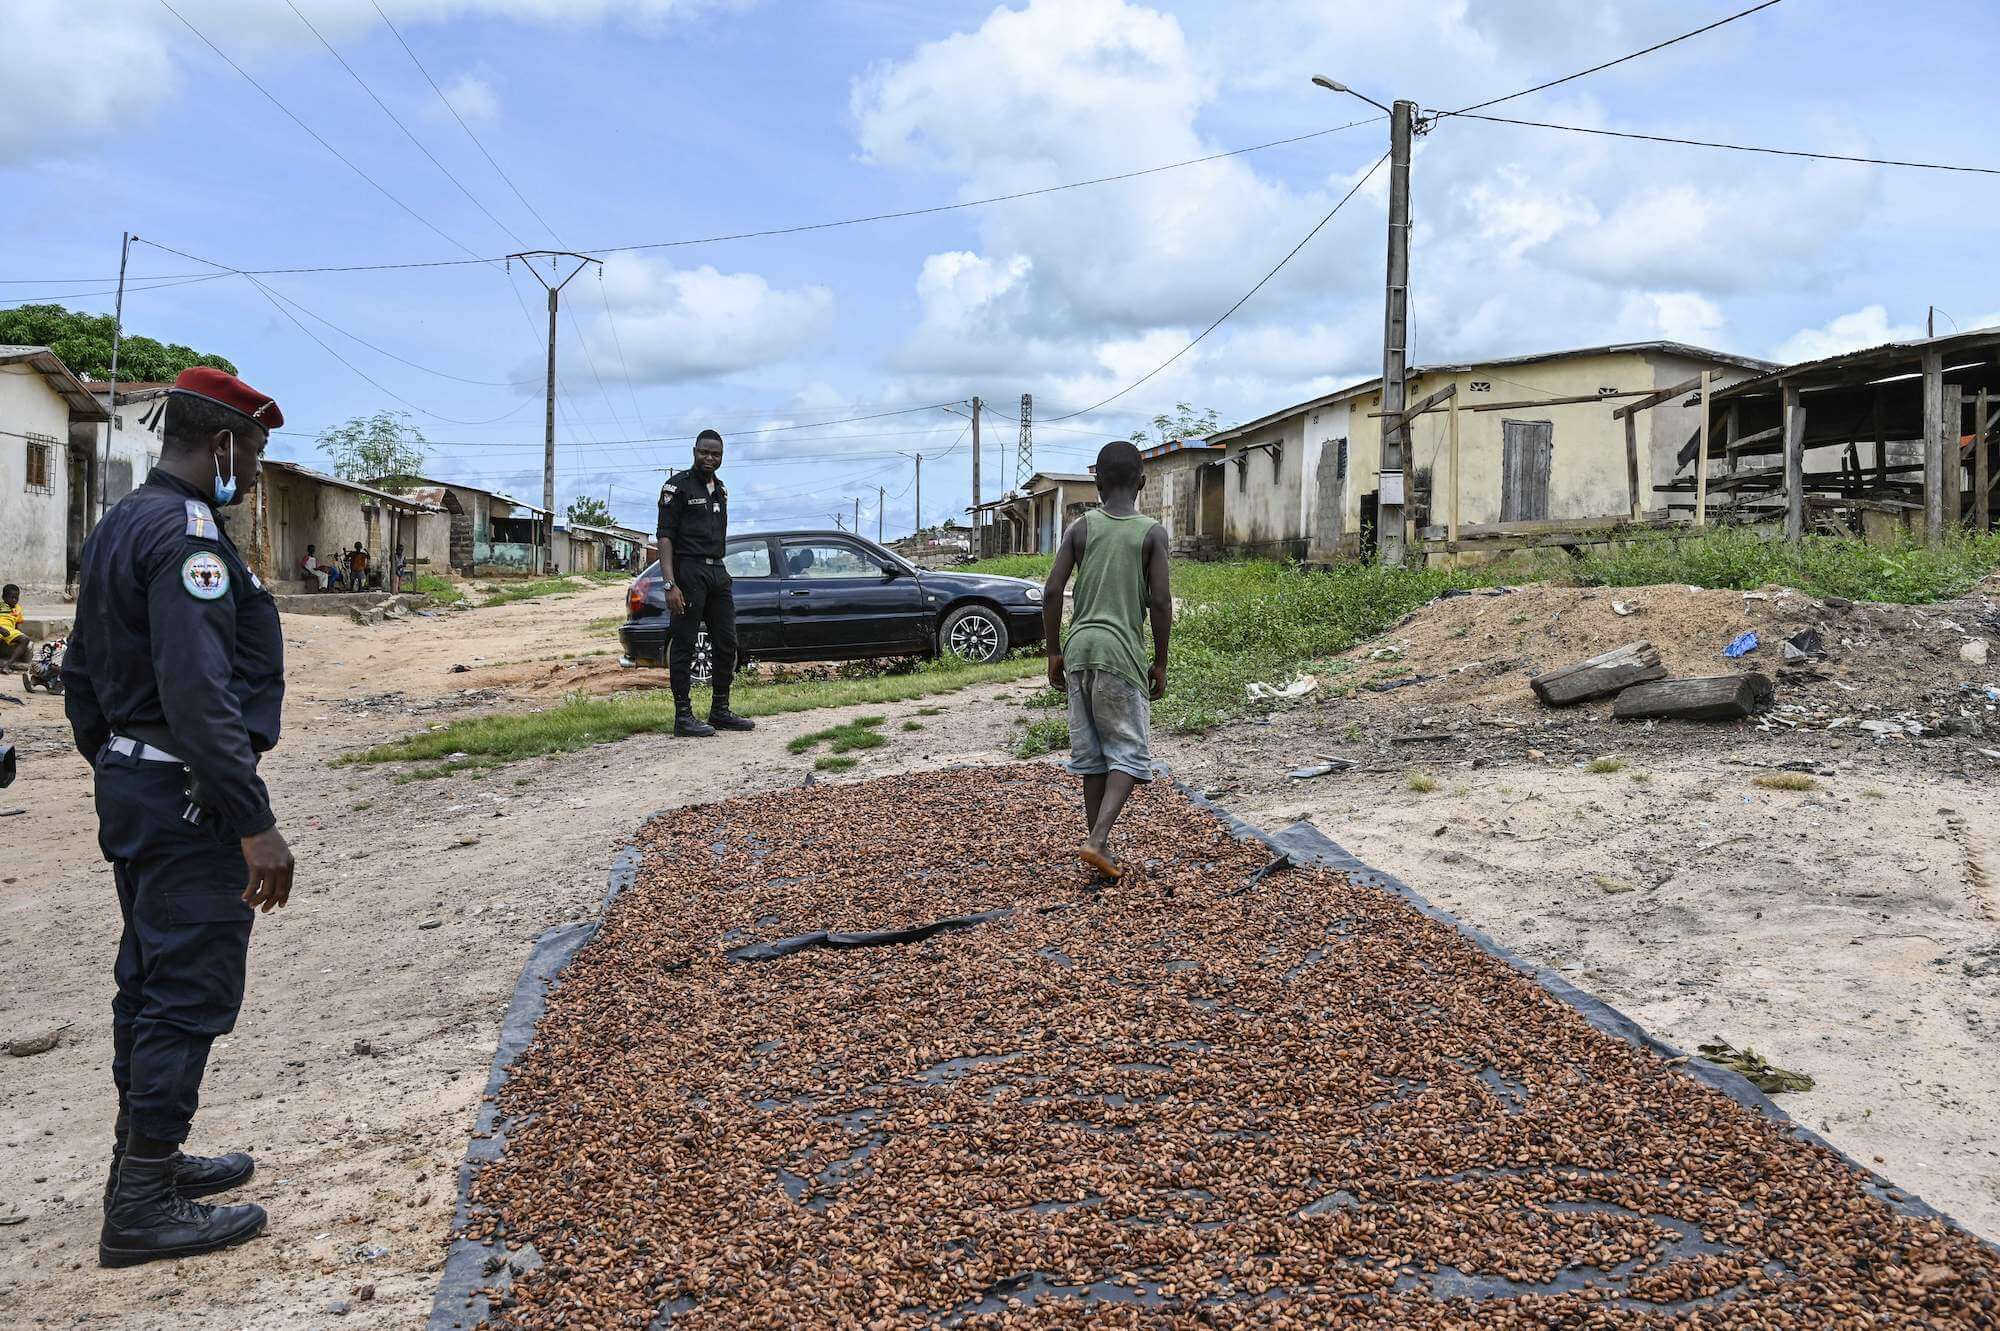 Two Ivorian gendarmes walk towards a child caught drying cocoa in the sun in the village of Opouyo in Soubre, on May 7, 2021 during an operation to remove children working on cocoa plantations. June 2021